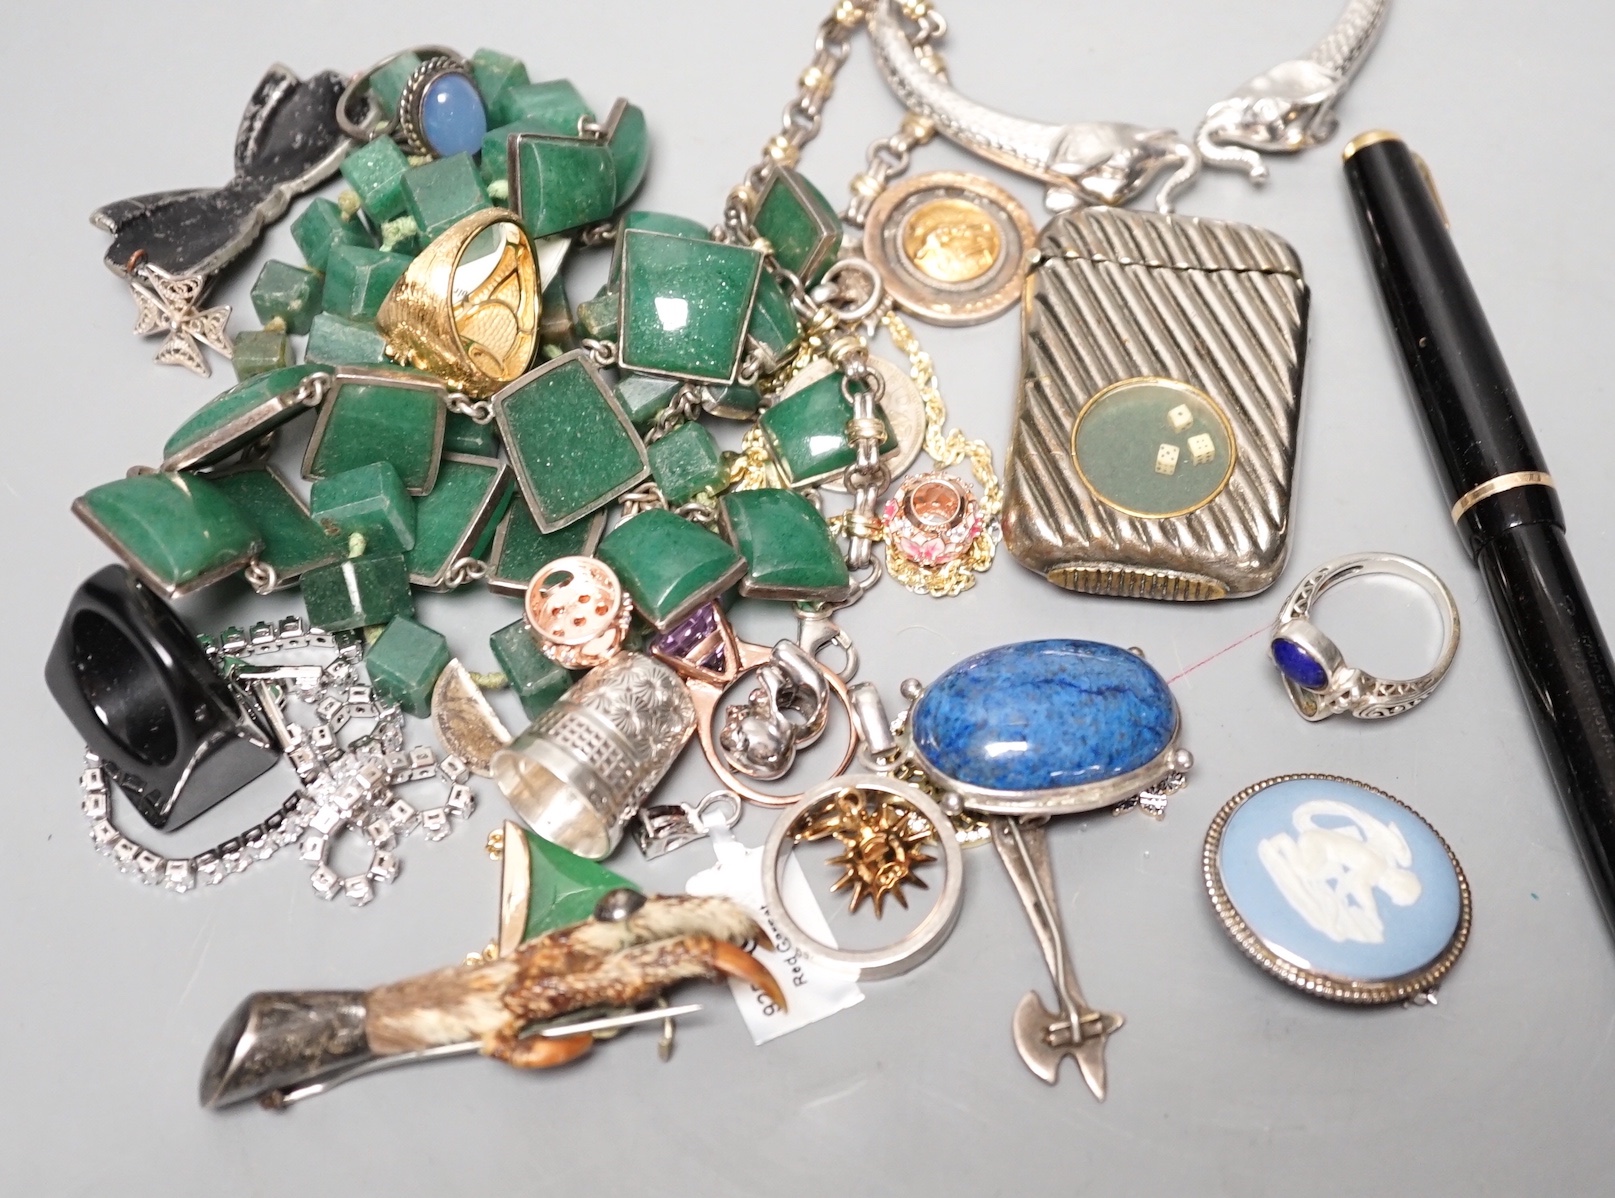 An early 20th century Cymric sterling and enamel brooch, 29mm, a silver nurses buckle and a group of assorted mainly costume jewellery.